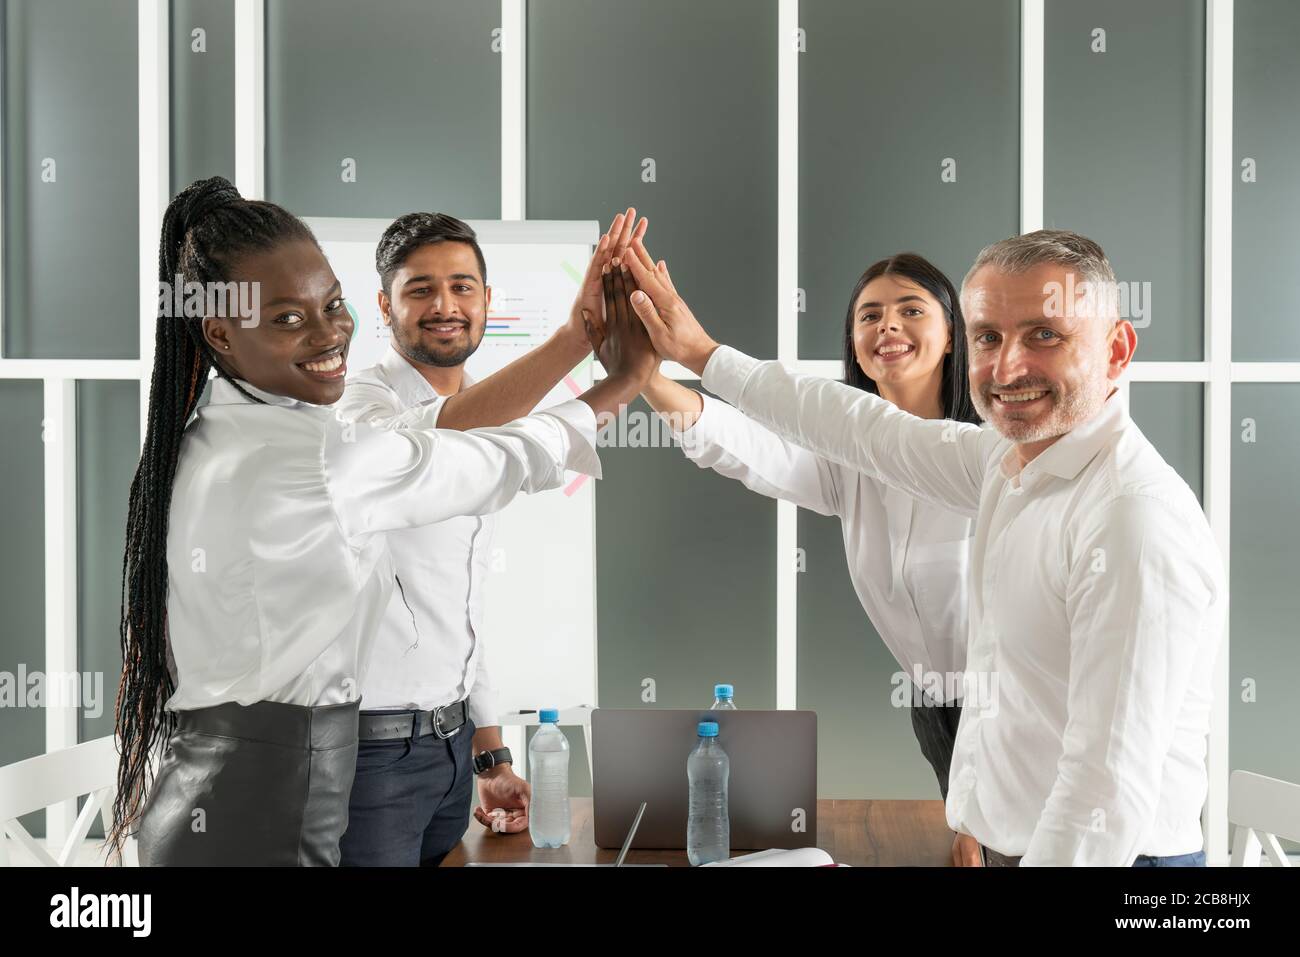 Teamwork concept. Happy successful multiracial business team giving a high fives gesture as they laugh and cheer their success Stock Photo